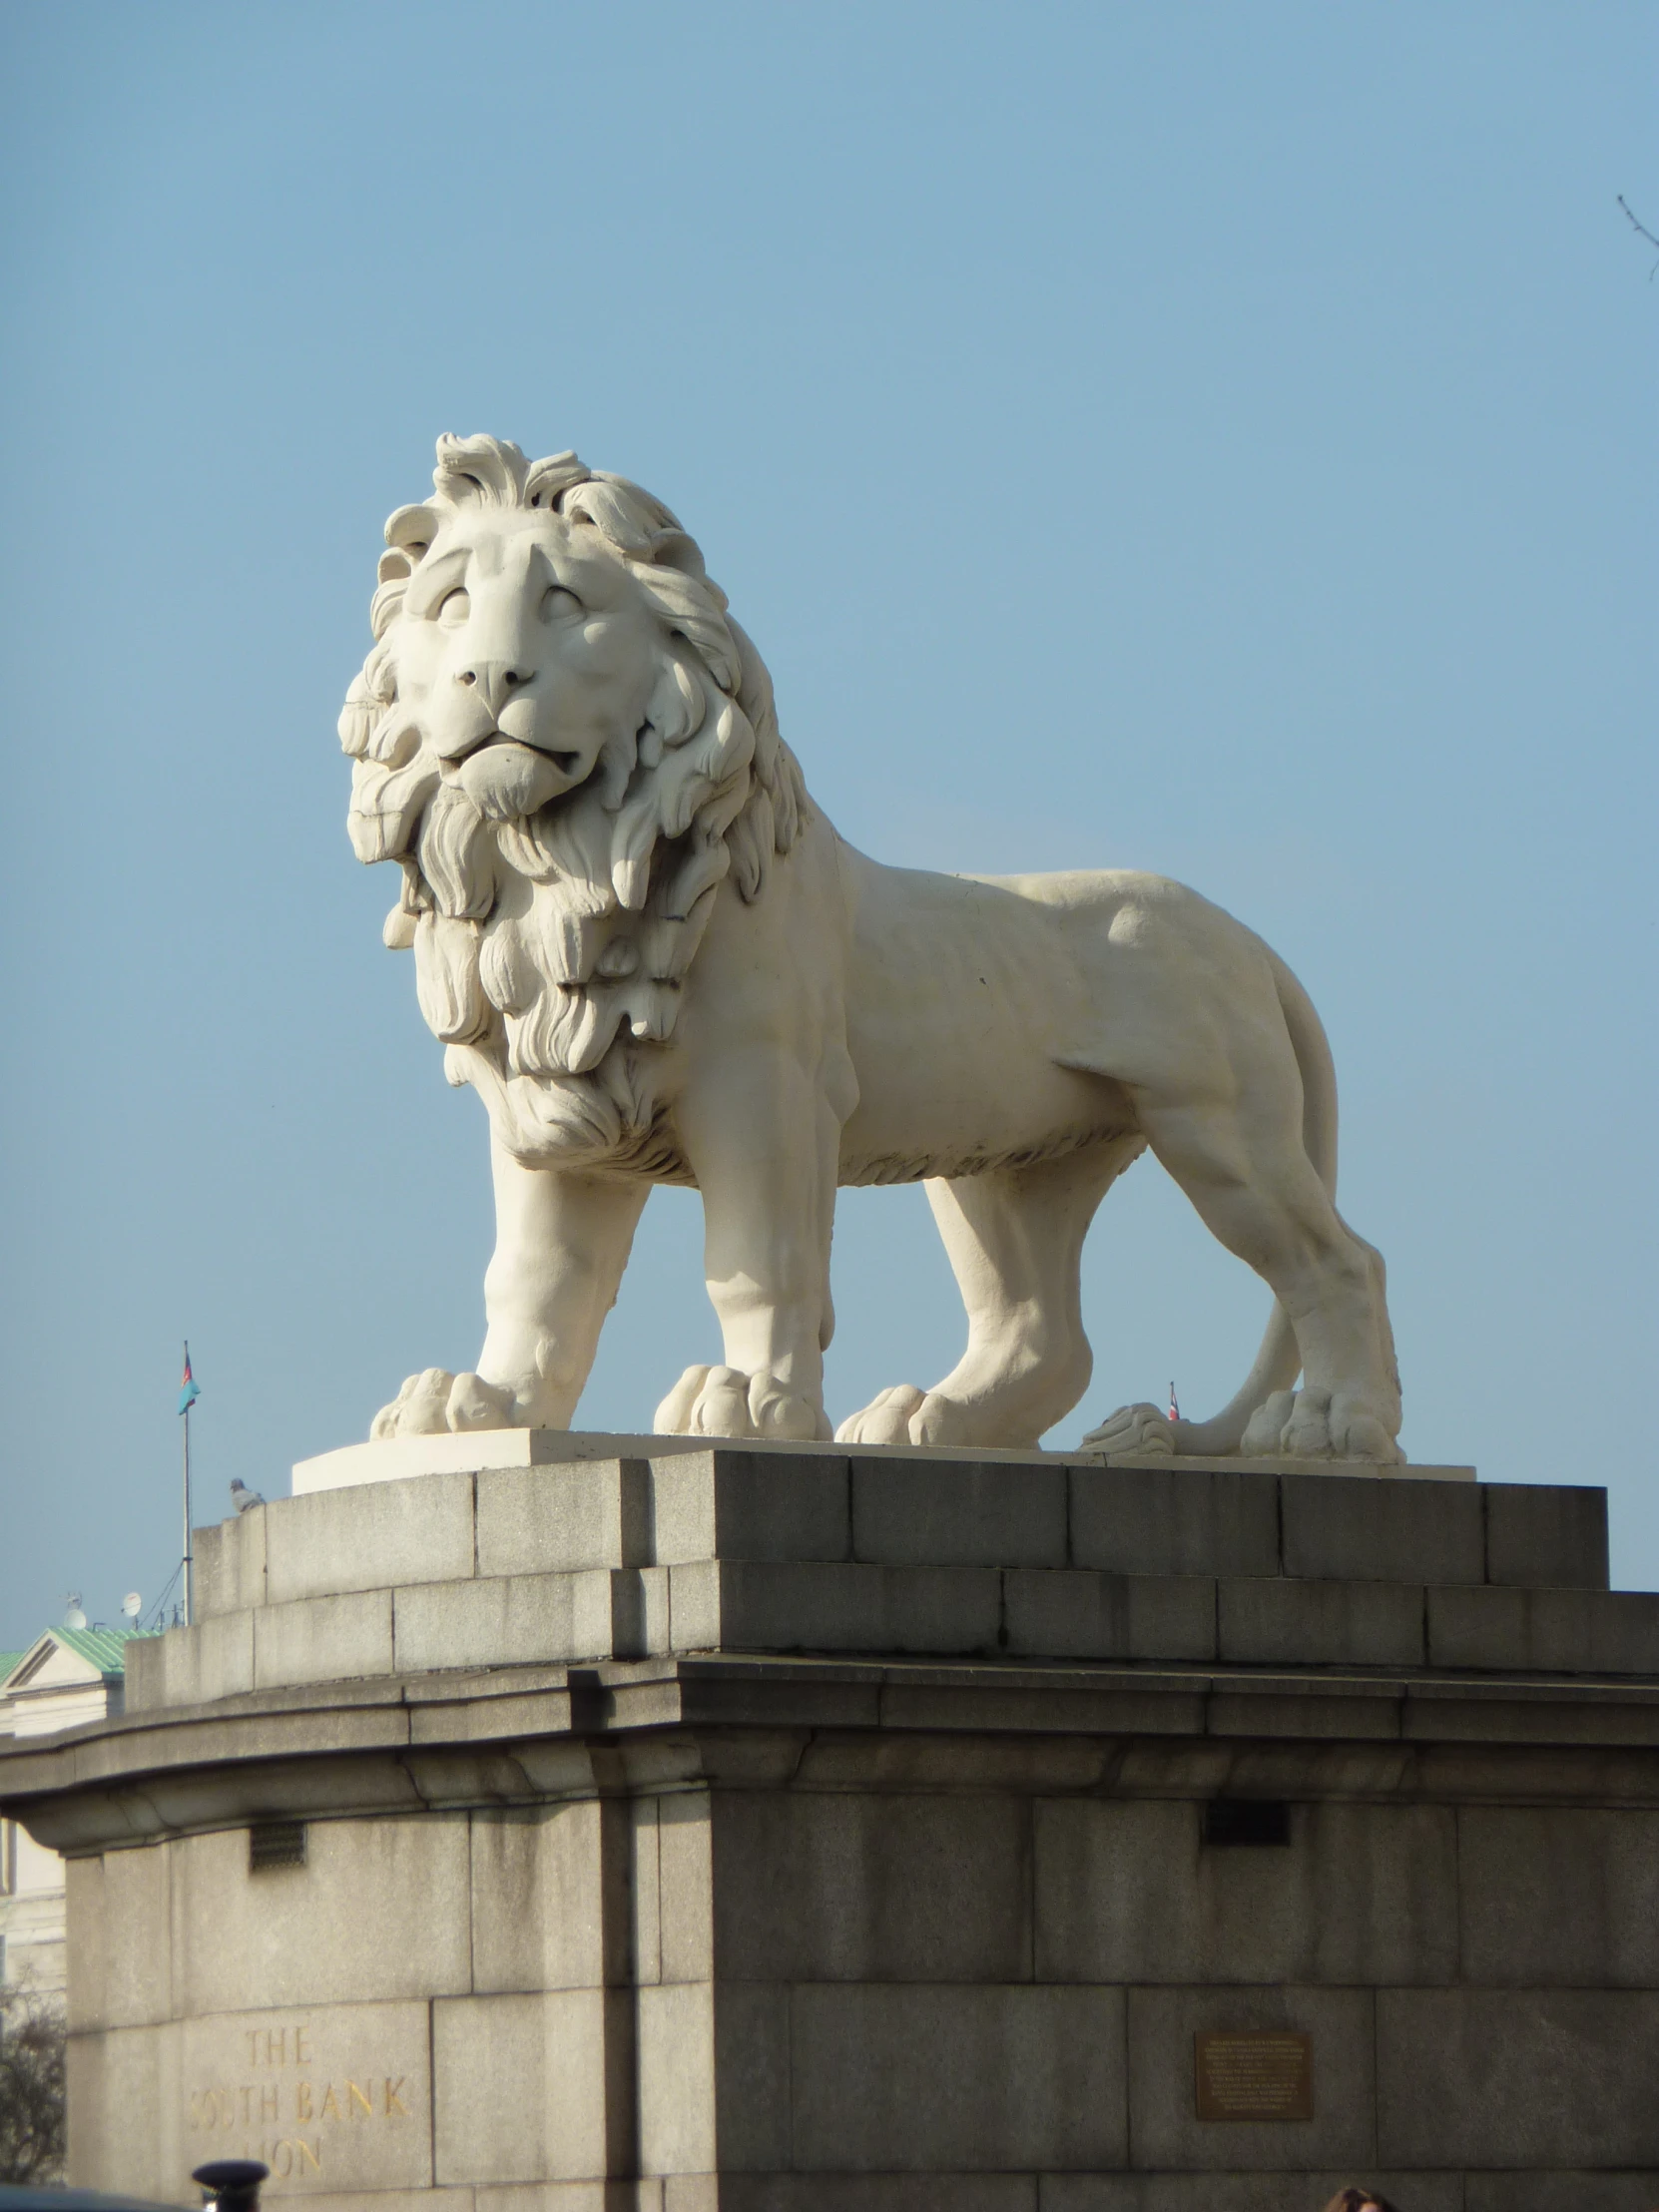 a stone lion statue atop a building, on a sunny day